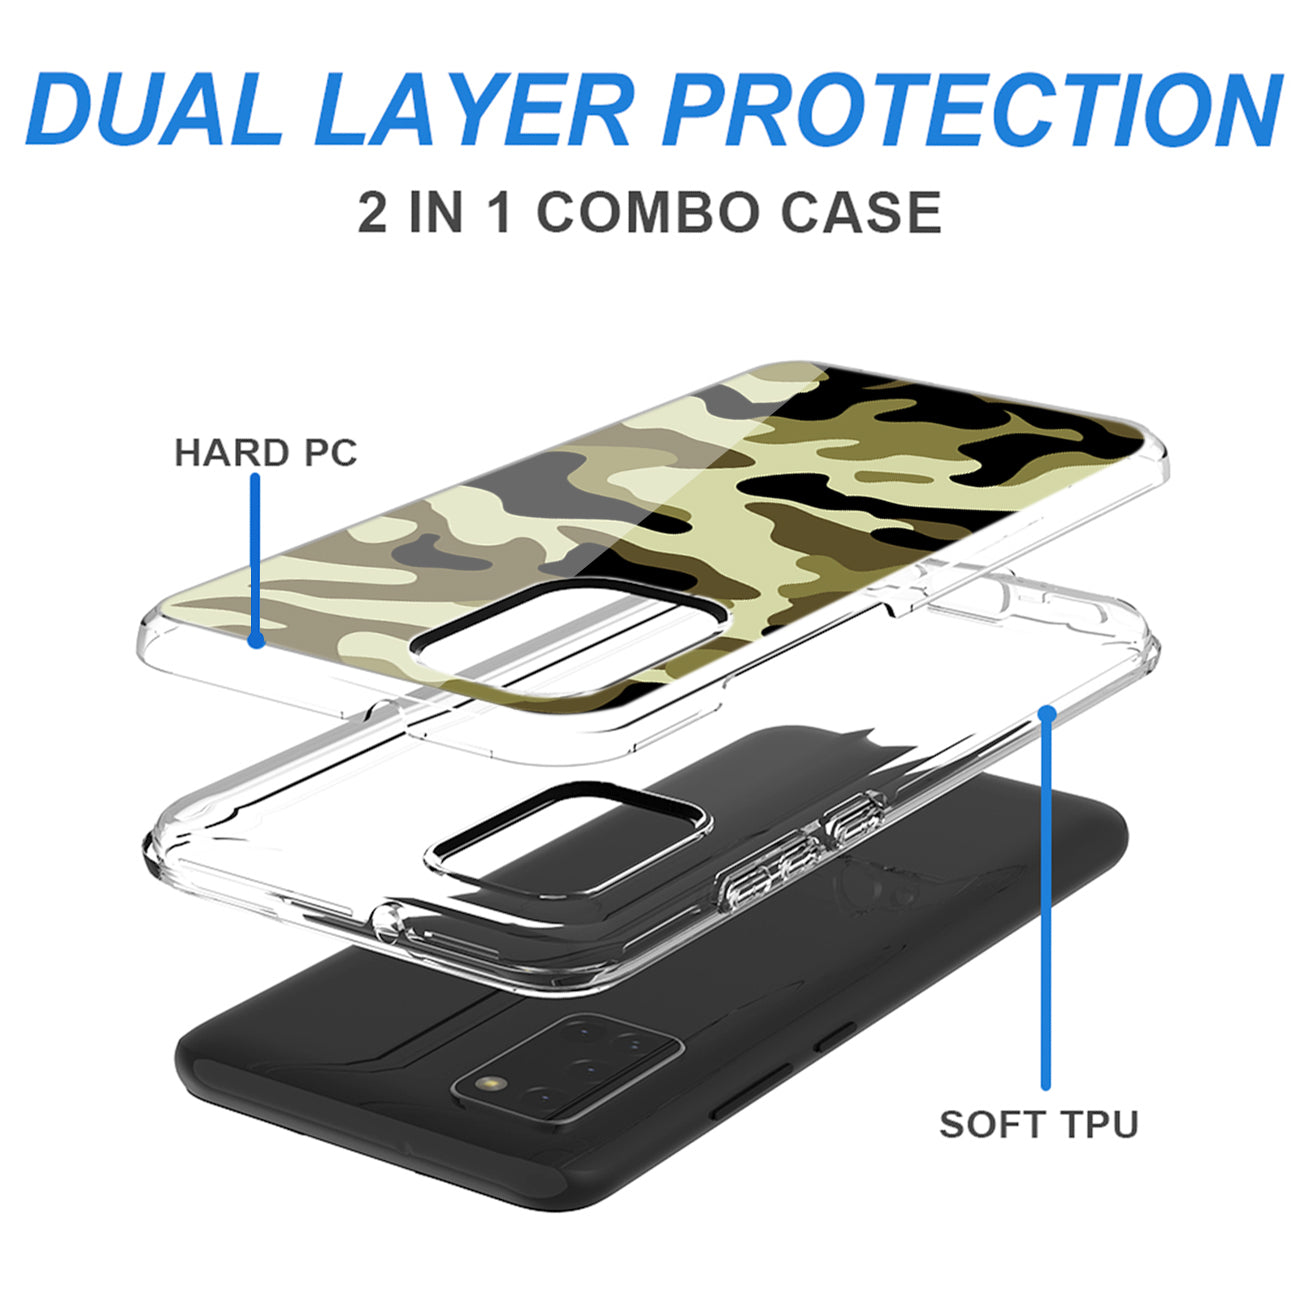 Camouflage Dual Layer Hybrid Hard & Soft TPU Rubber Case for SAMS GALAXY A31 In Green